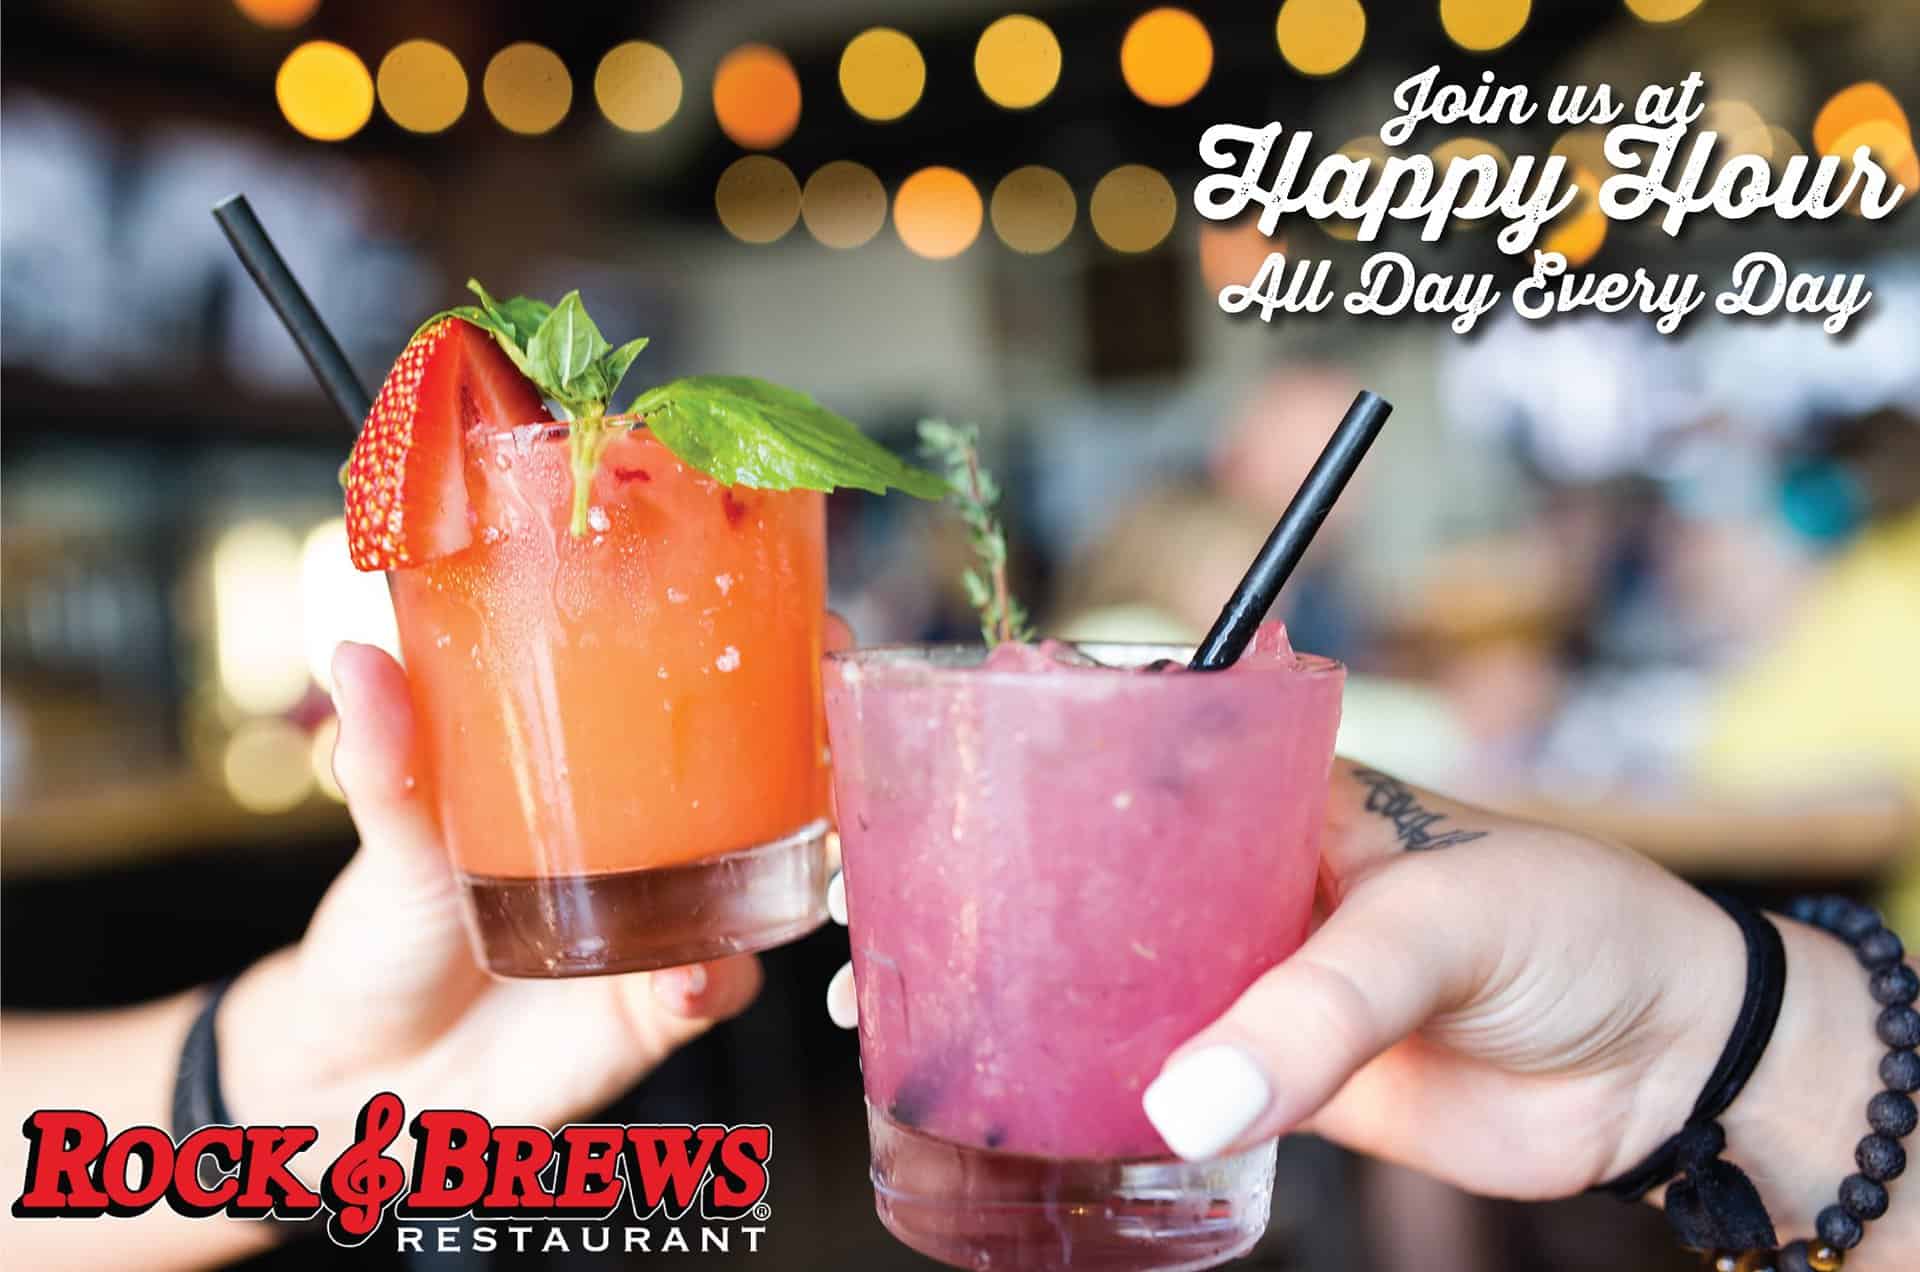 Join us at Happy Hour all day, every day at Rock & Brews